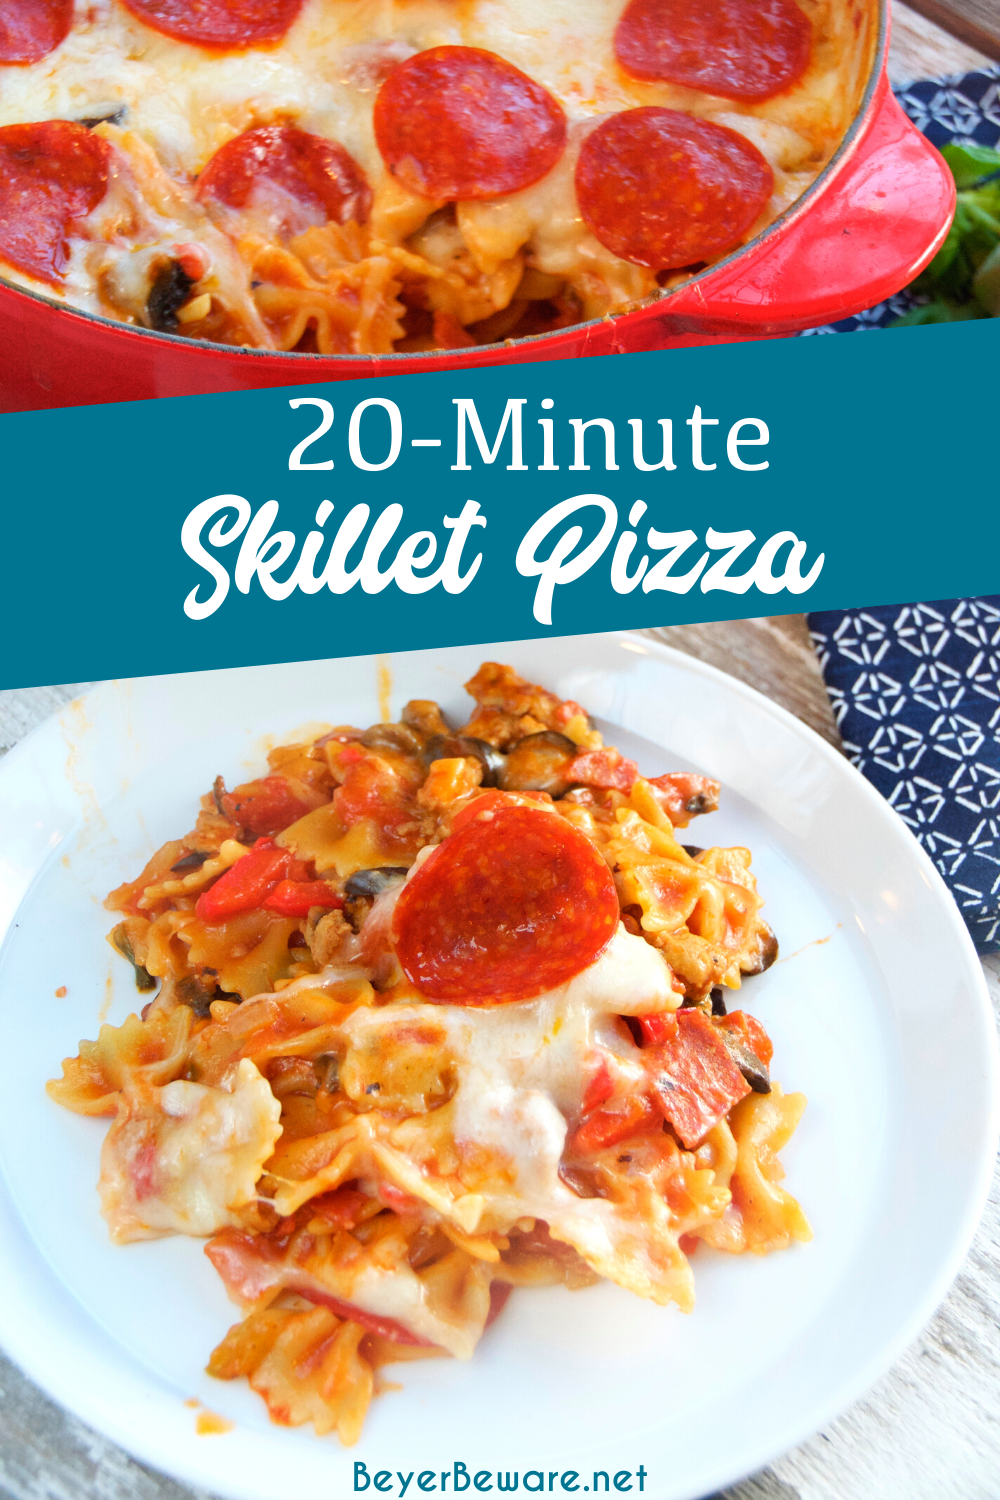 20-Minute Skillet Pizza Casserole is a quick weeknight pasta meal all made in the same pan and filled with all the ingredients you love on your favorite pizza.